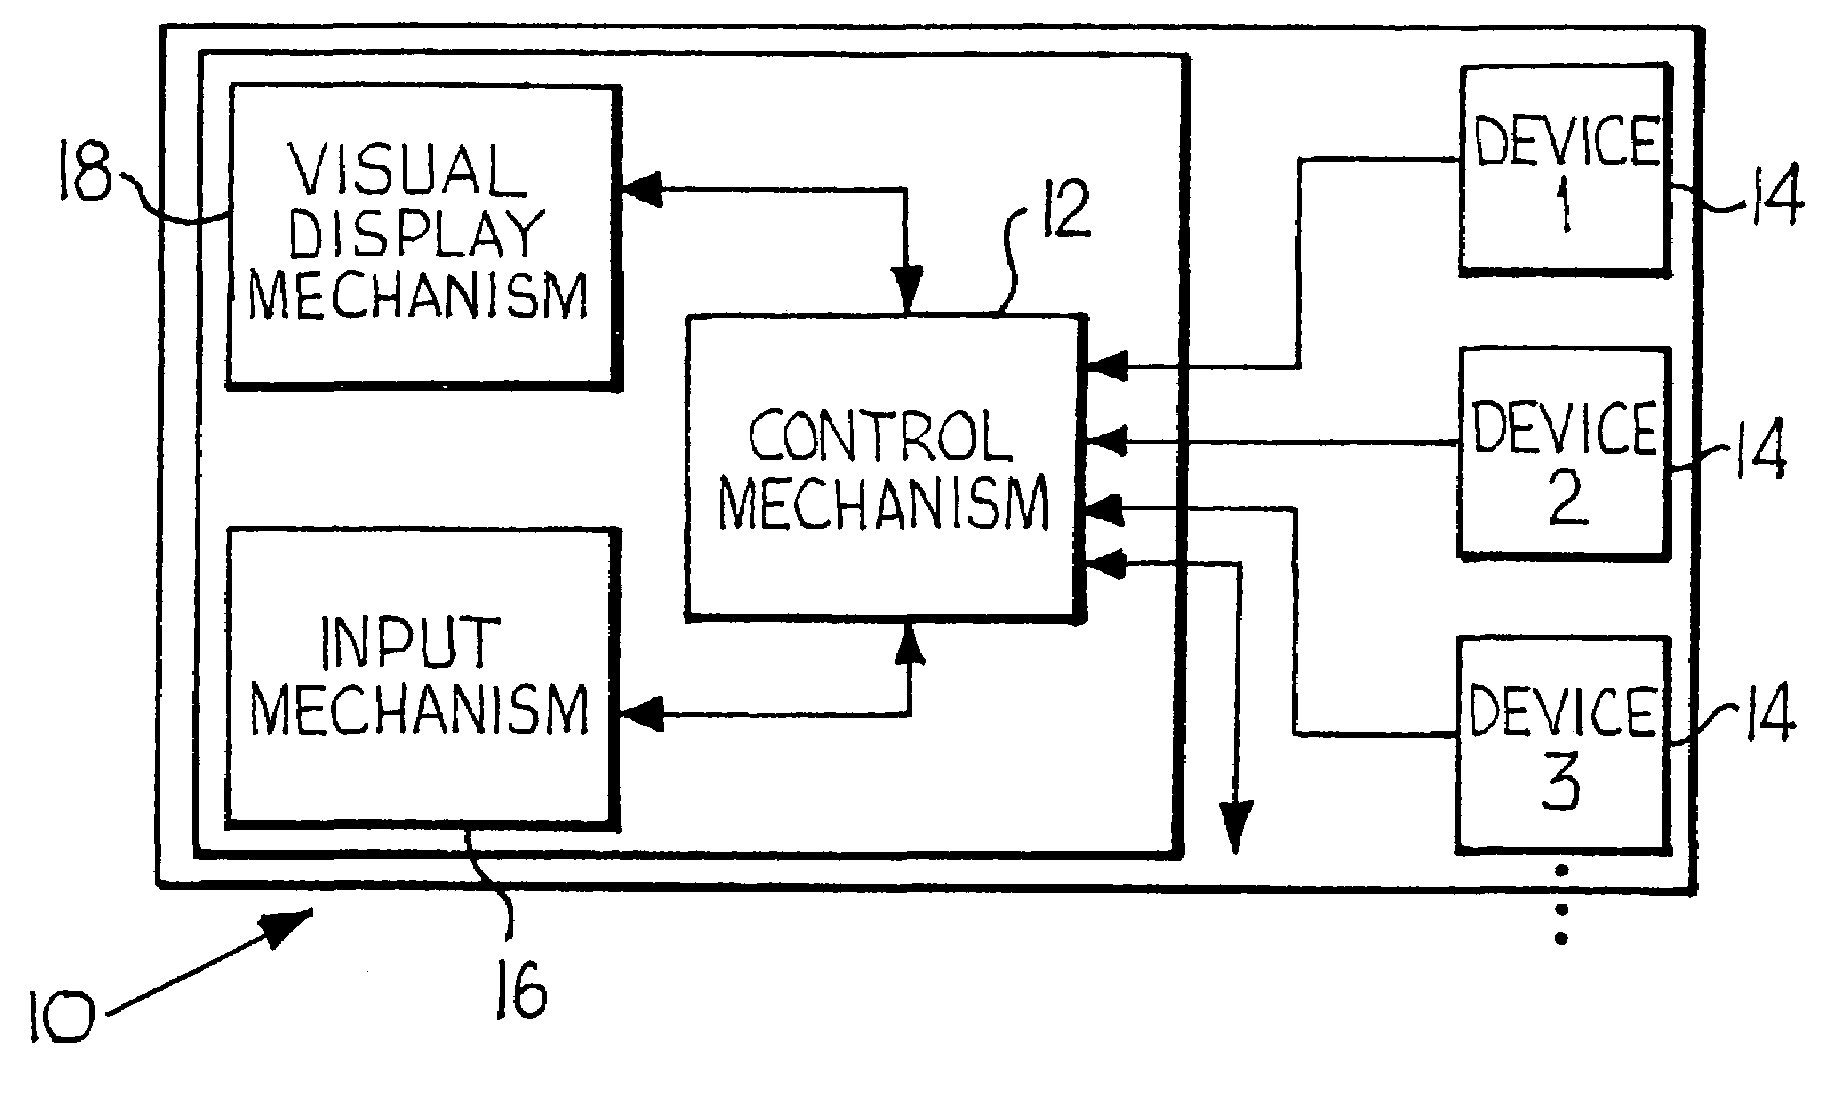 Method and apparatus for remotely controlling a plurality of devices